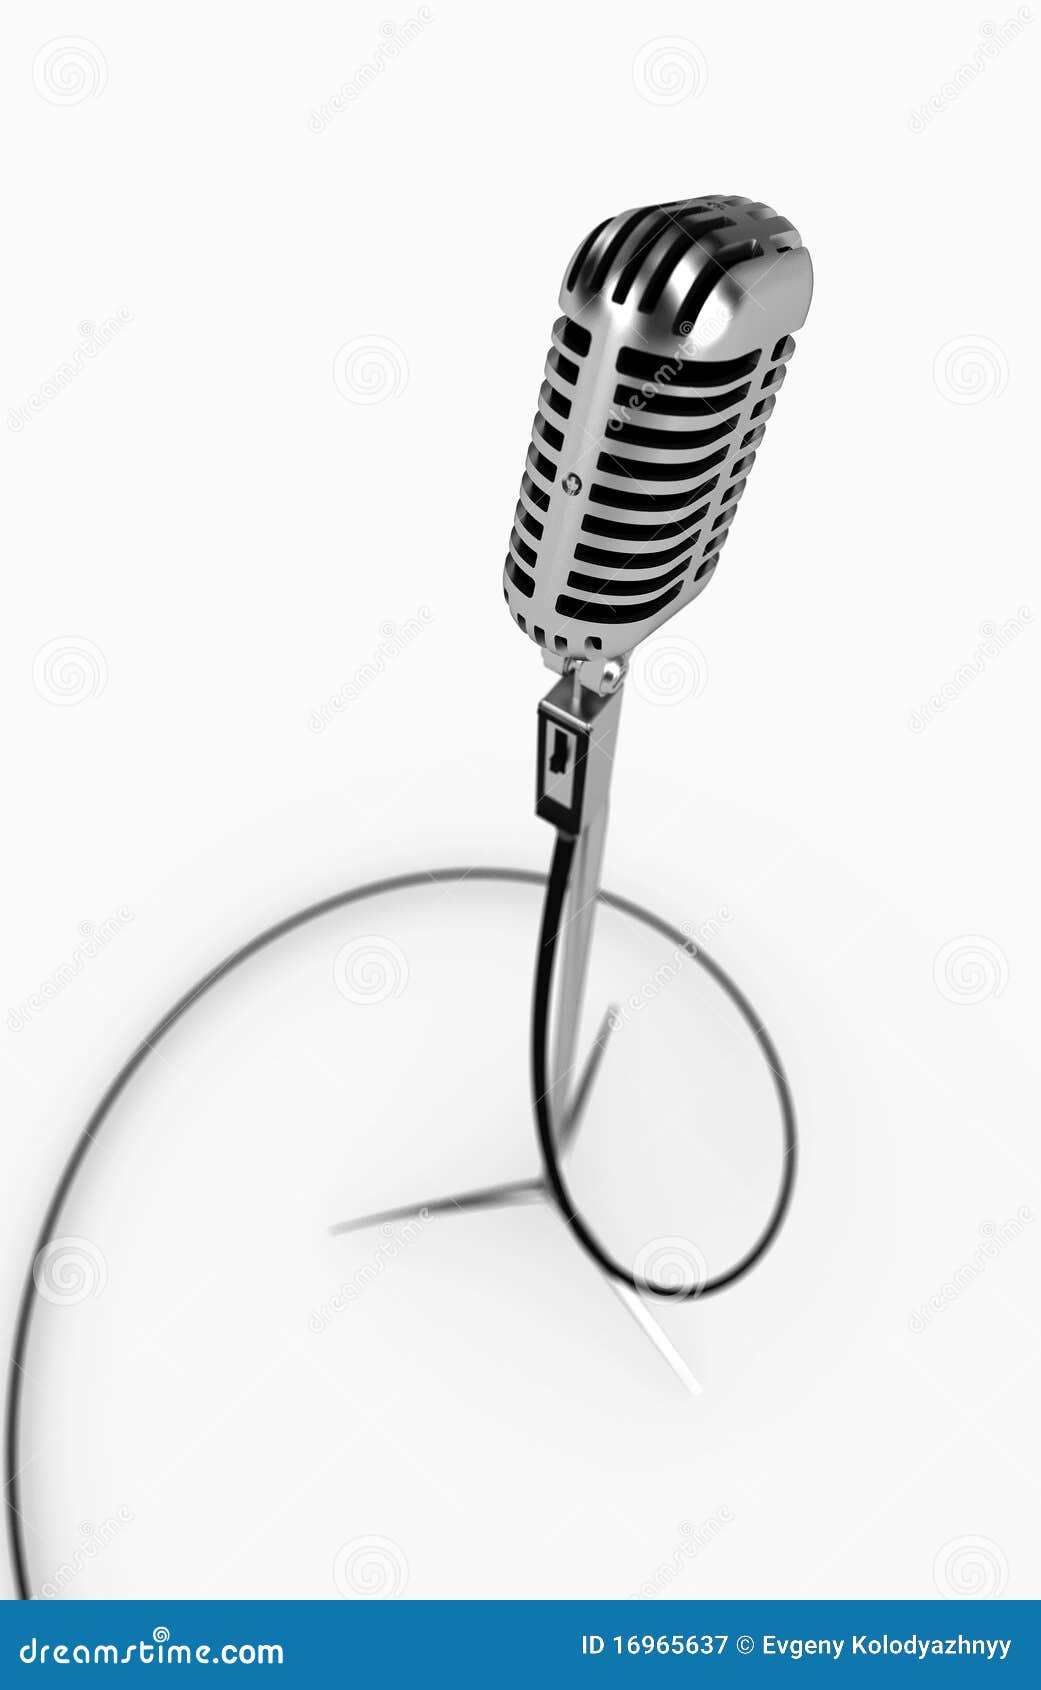 Metallic isolated microphone on white